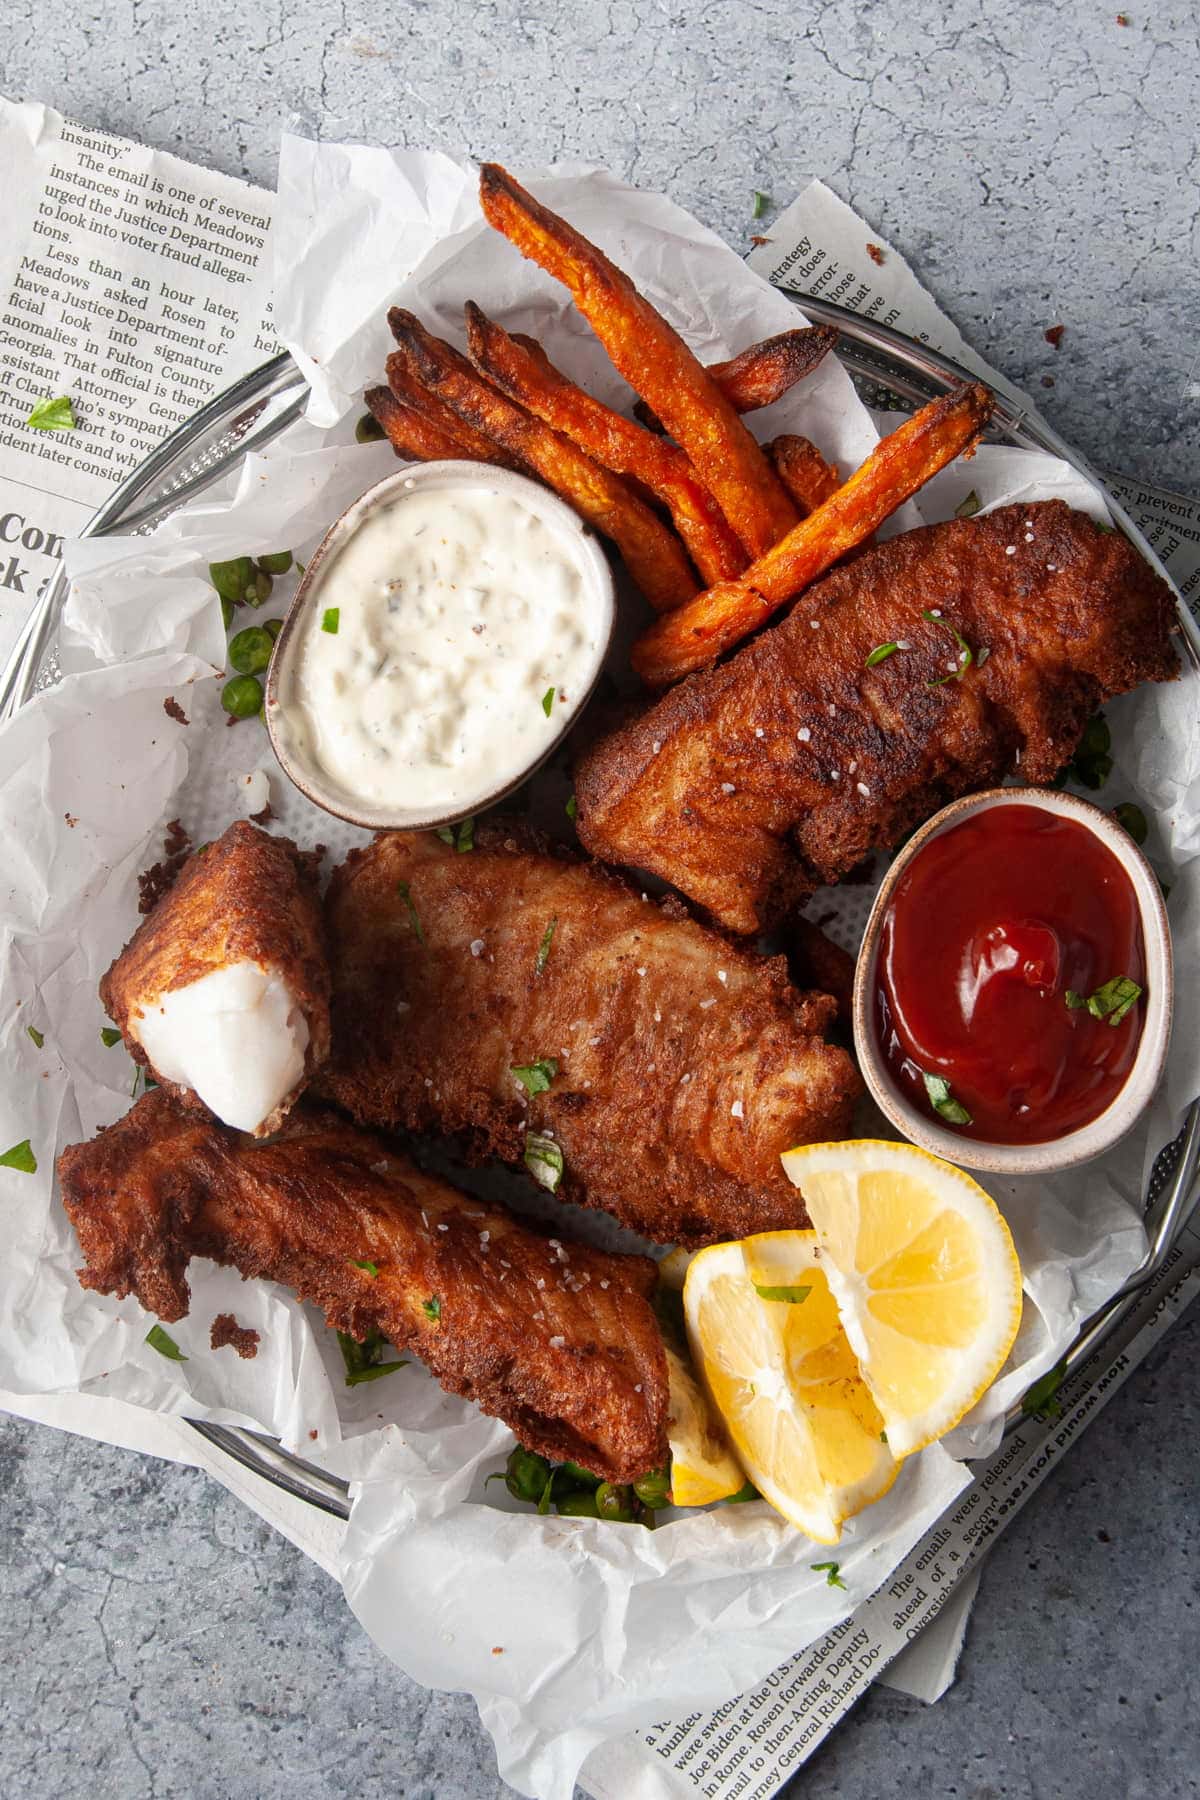 Halibut Fish and Chips - Beer Battered Fish Recipe